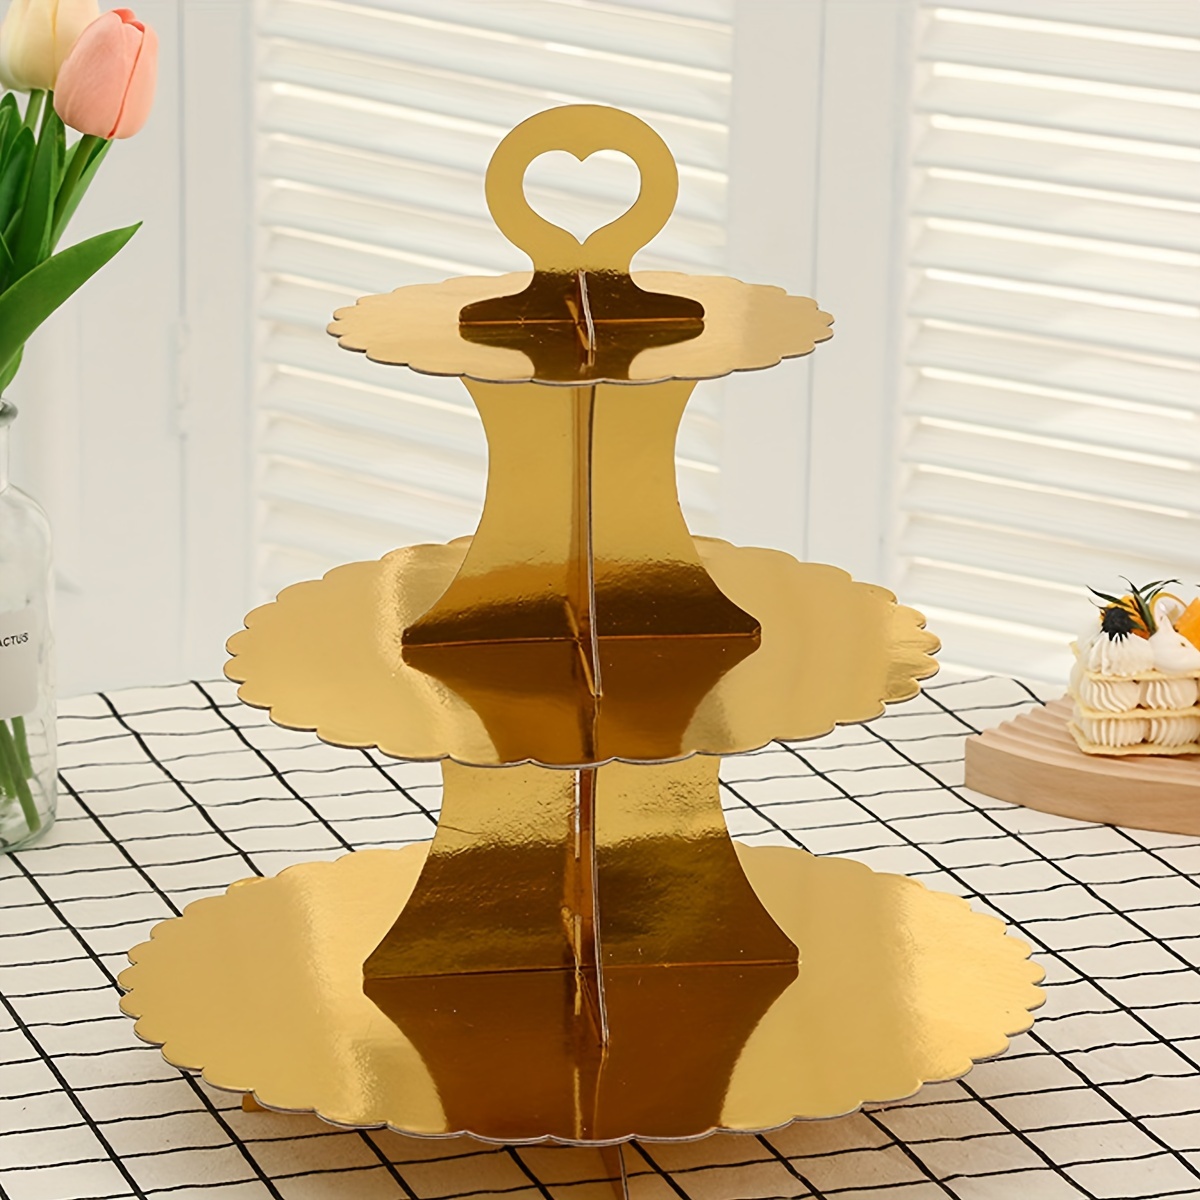 

1pc 3-tier Cupcake Stand Cardboard, Round Dessert Tree Display Tower, Dried Fruit Snack Candy Chocolate Holder Universal For Christmas, Weddings, Birthdays, Parties, Table Decors, Party Supplies